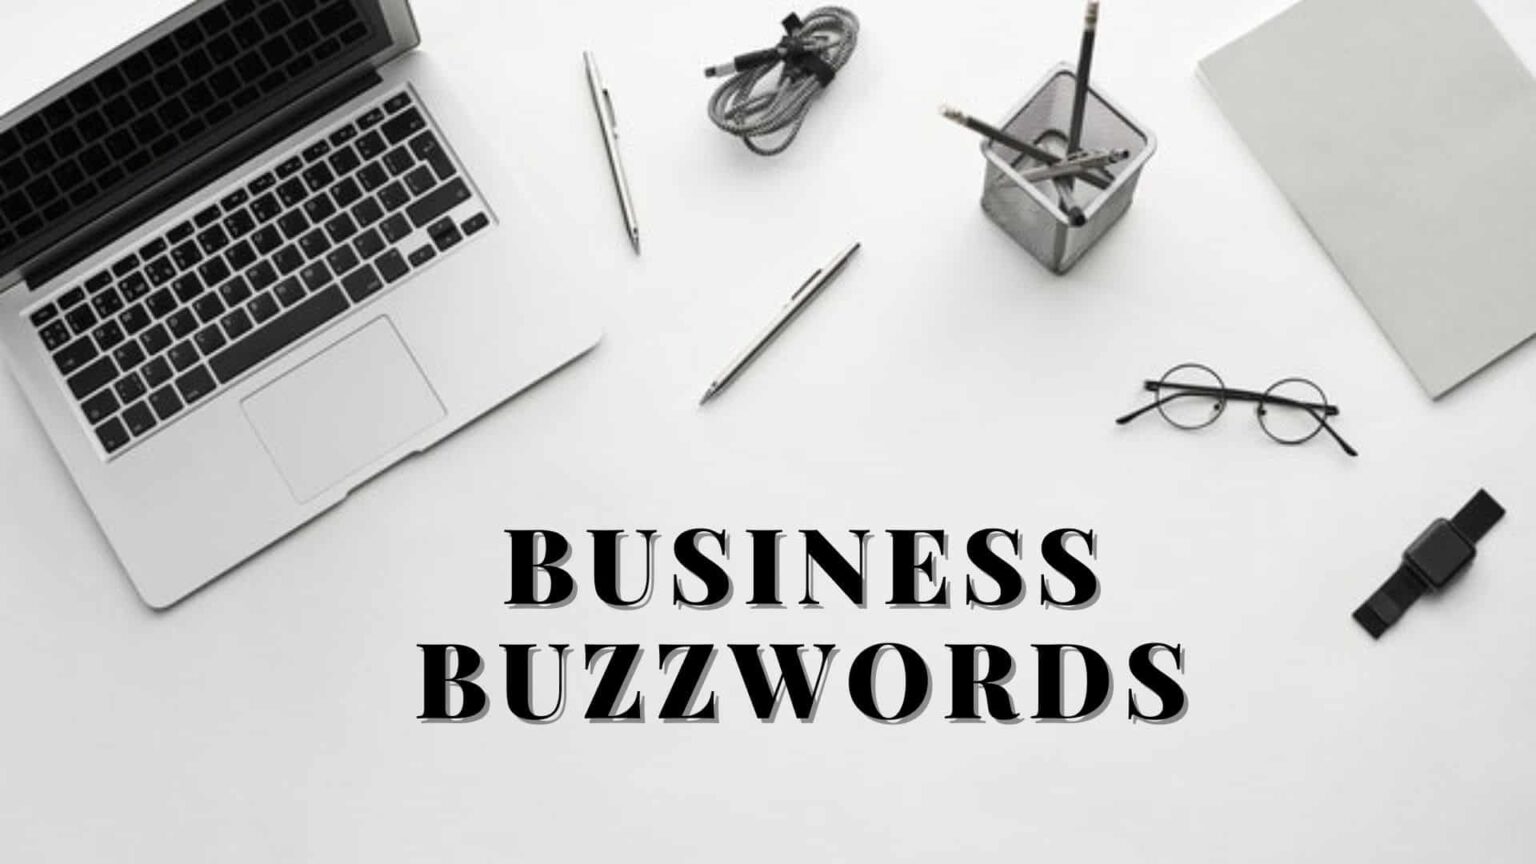 List Of Most Used Business Buzzwords Supply Chain India Jobs